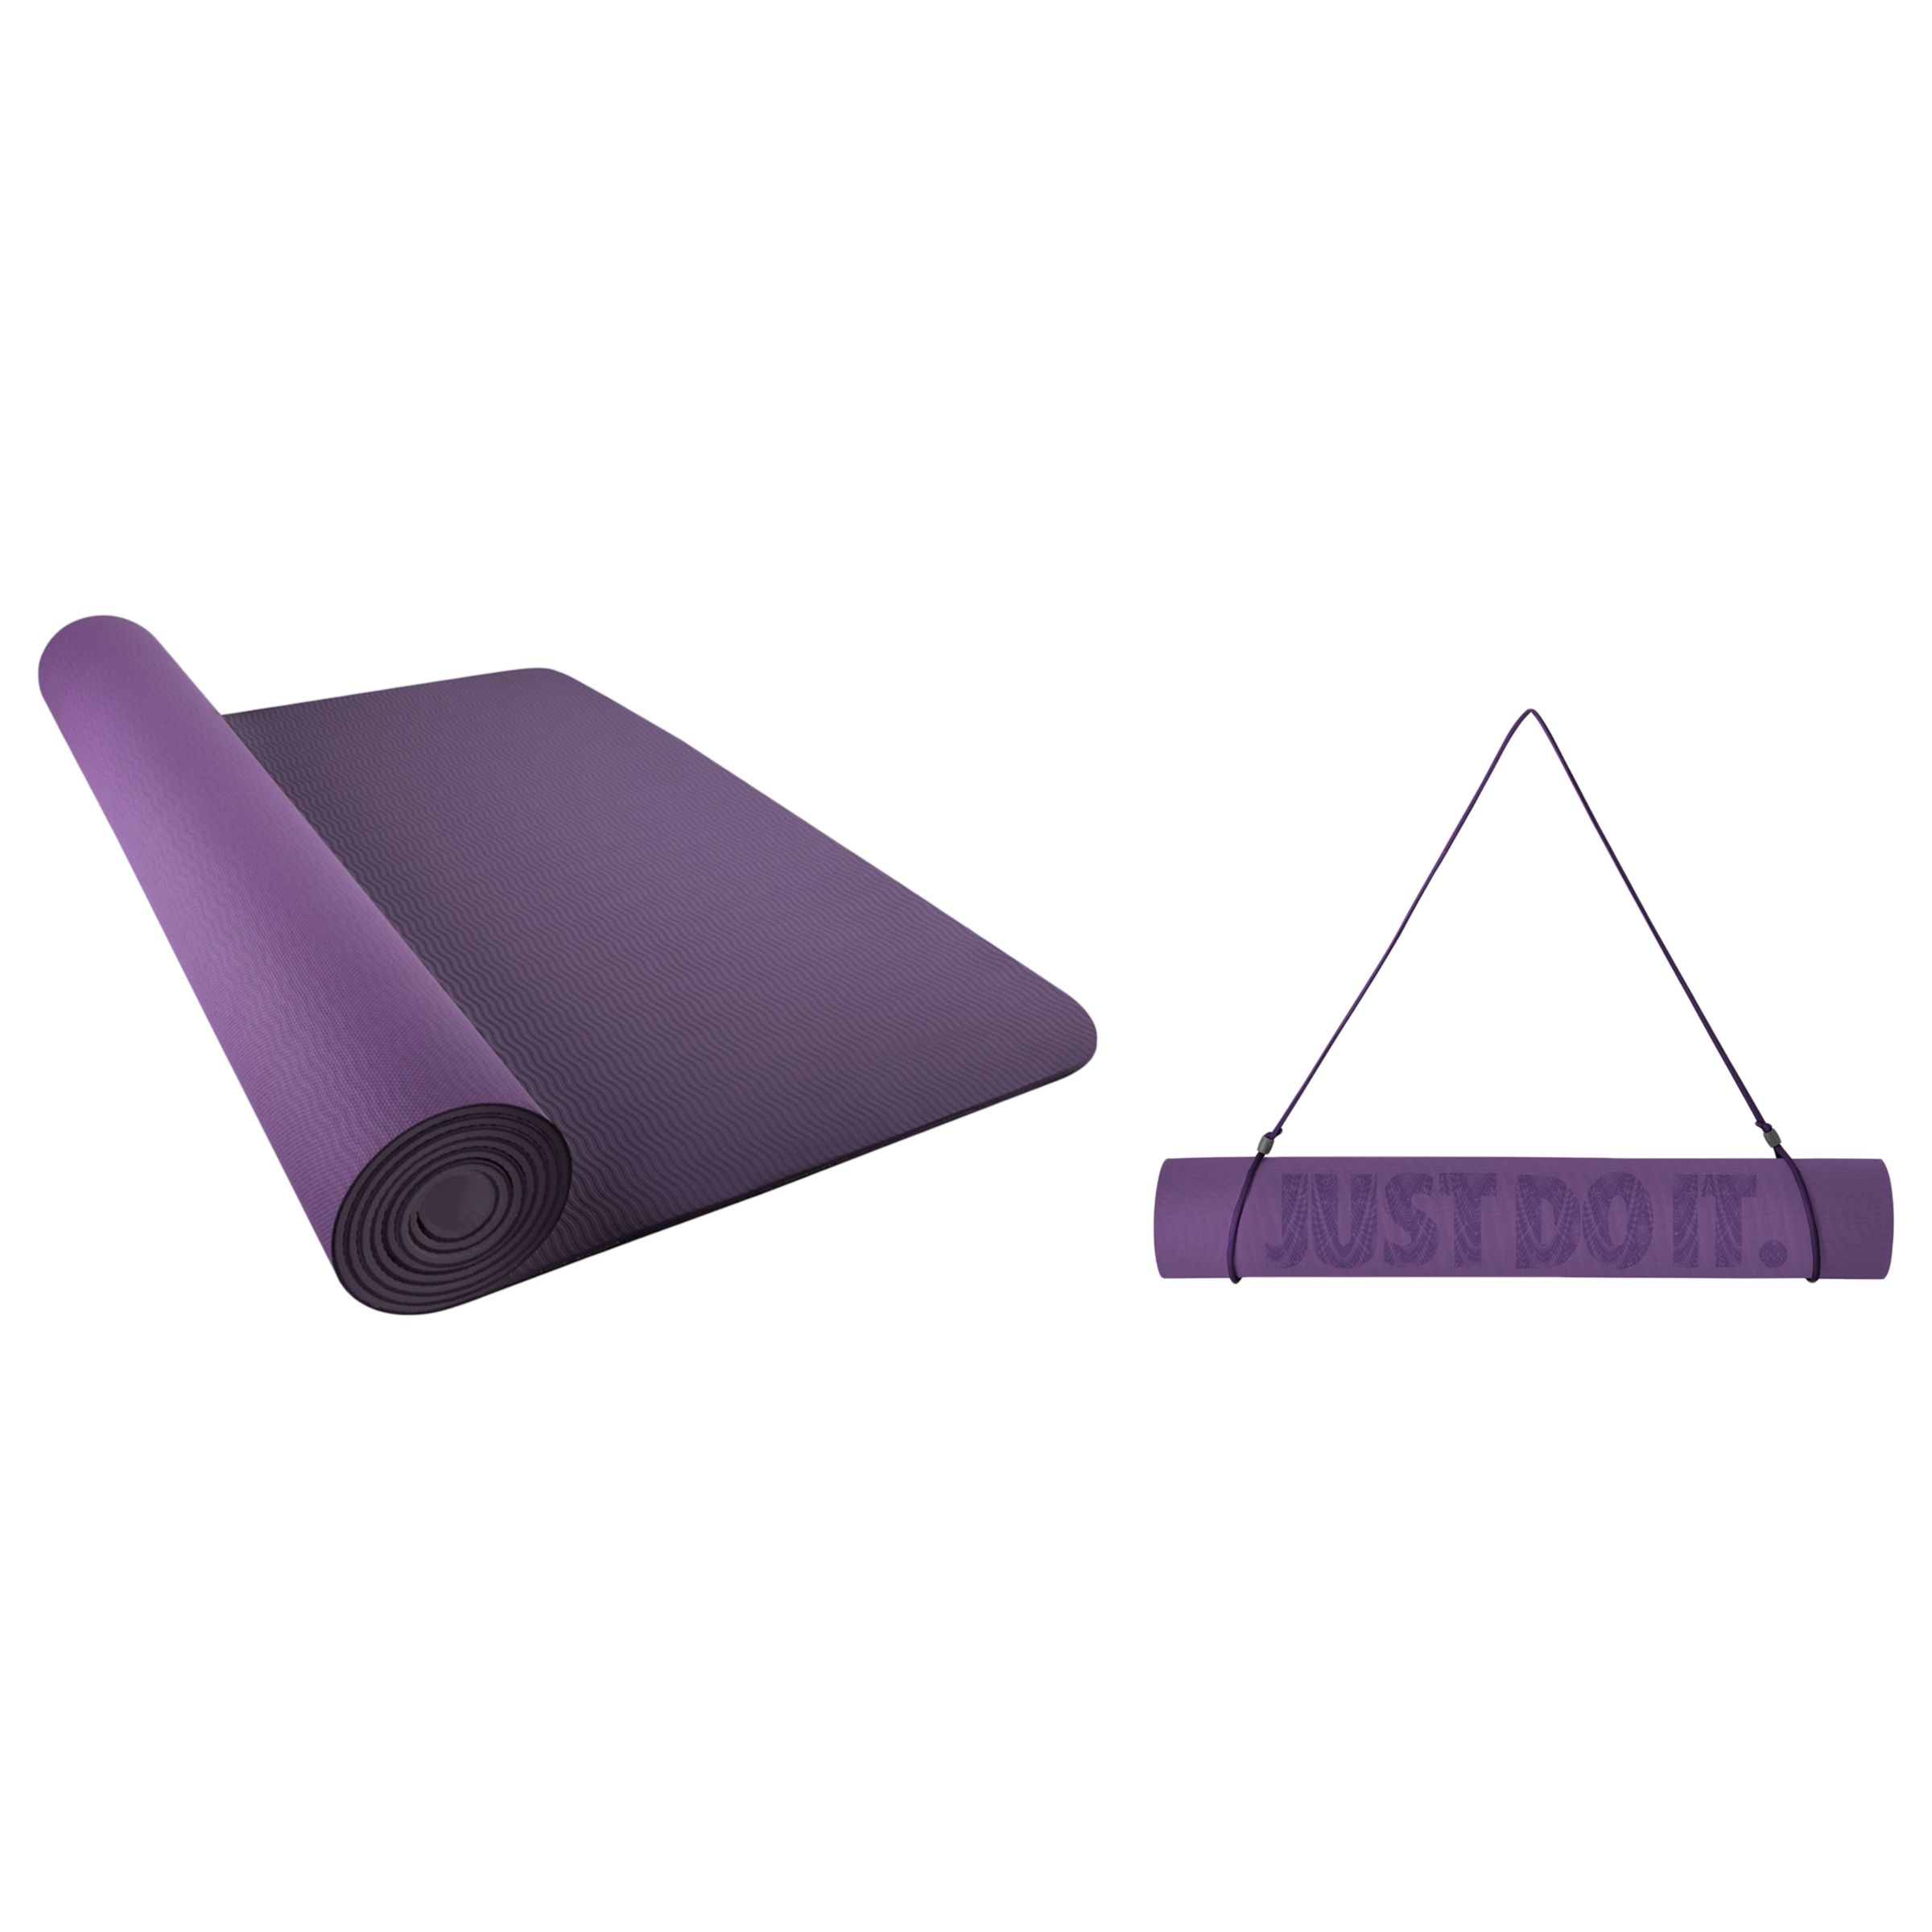 Nike Just Do It Yoga Mat 2.0 Review